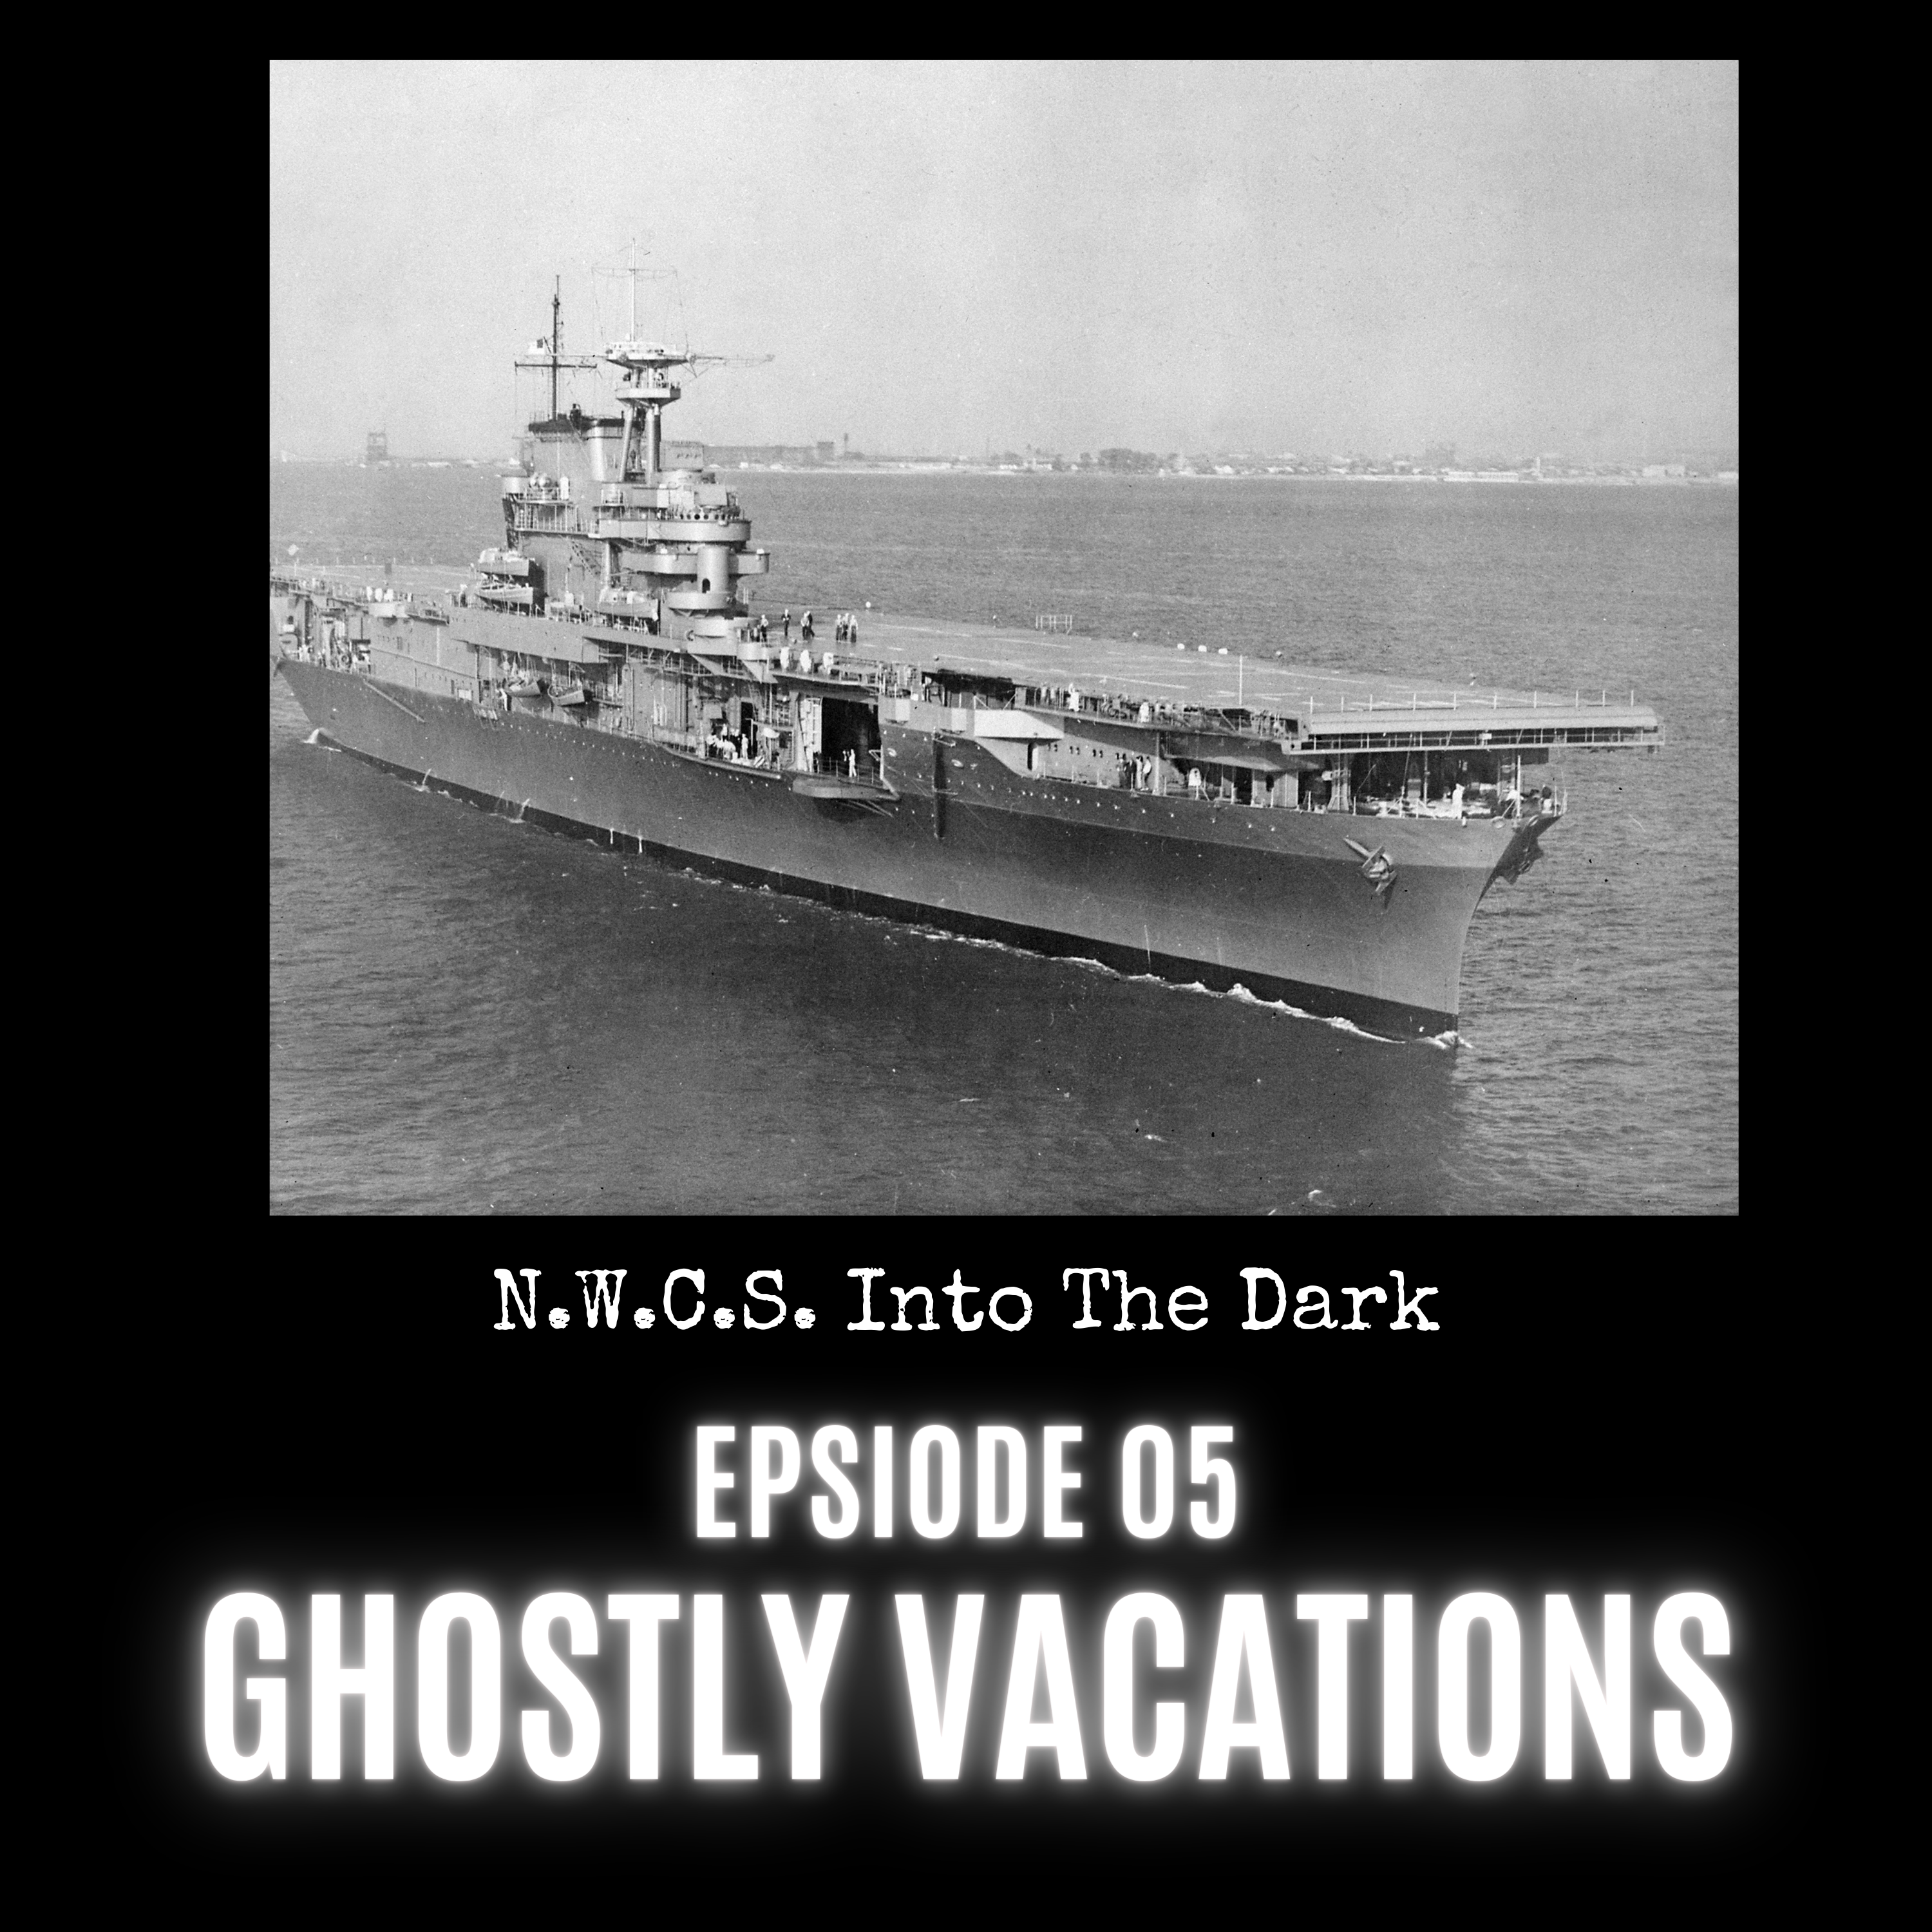 N.W.C.S. - Into The Dark Episode 05 - Ghostly Vacations